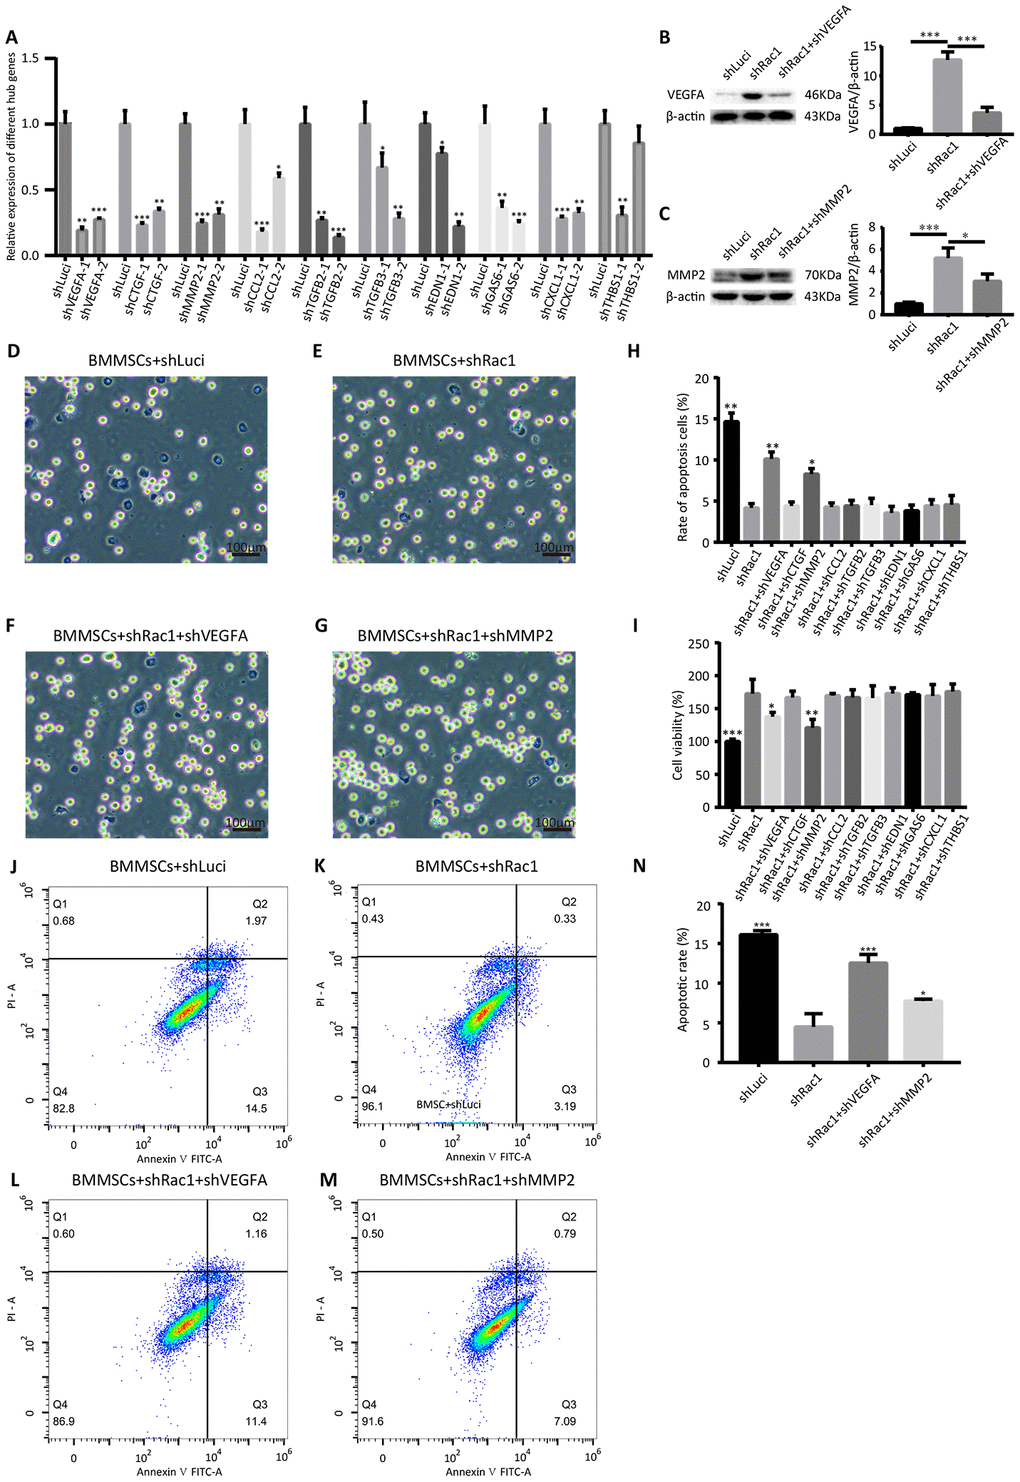 shVEGFA and shMMP-2 attenuate the shRac1-mediated effects in BMMSCs. (A) qRT-PCR analysis confirmed shRNA knockdown of each hub gene. (N.S. no significance, *P B, C) VEGFA and MMP2 protein expression in shLuci, shRac1, shRac1-shVEGFA and/or shRac1-shMMP2 BMMSCs post-OGD 12 h, β-actin was used as the housekeeping protein. (*P D–G) Images showing trypan blue-stained shLuci, shRac1, shRac1+shVEGFA, and shRac1+shMMP-2 cells captured under a bright field microscope with scale bar of 100 μm. (H) Quantitative analyses of trypan blue staining showing increased apoptotic rate of BMMSCs-shRac1 co-transfected with shVEGFA or shMMP-2 lentiviruses in comparison with the BMMSCs transfected with shRac1 alone. (N.S. no significance, *P I) BMMSCs-shRac1 survival was attenuated by the co-transfection of shVEGFA and shMMP-2 lentiviruses, but not by other shRNA, as measured by the CCK-8 analysis (N.S. no significance, *P J–N) Flow cytometry measured apoptosis of different BMMSCs cell lines. Data further show anti-apoptosis effect of BMMSCs-shRac1 can be weakened by shVEGFA or shMMP-2 co-transfection. (*P 